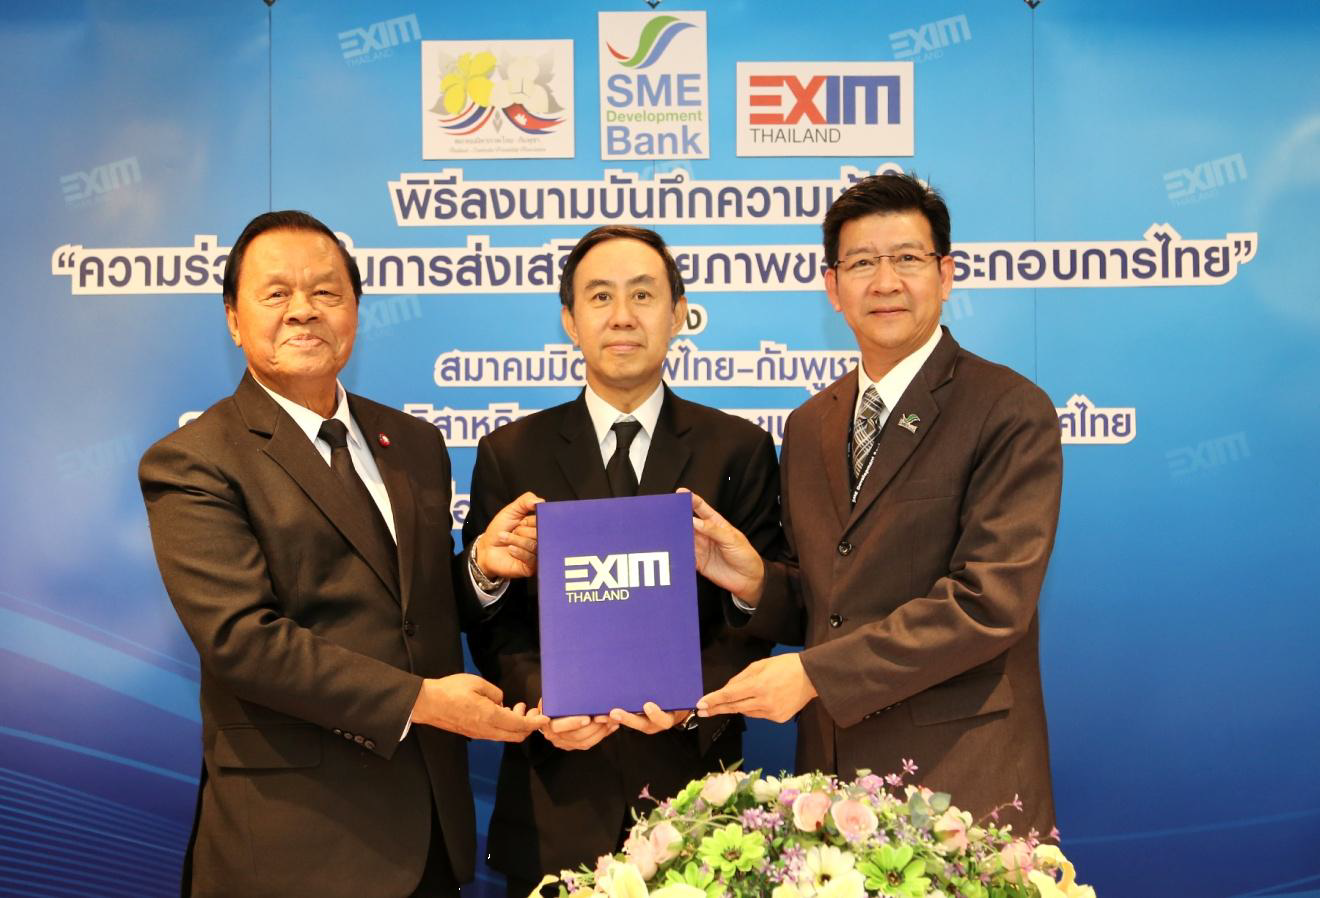 EXIM Thailand Joins hands with Thailand-Cambodia Friendship Association and SME Development Bank to Promote Thai Entrepreneurs’ Capacity Building on Trade and Investment in Cambodia